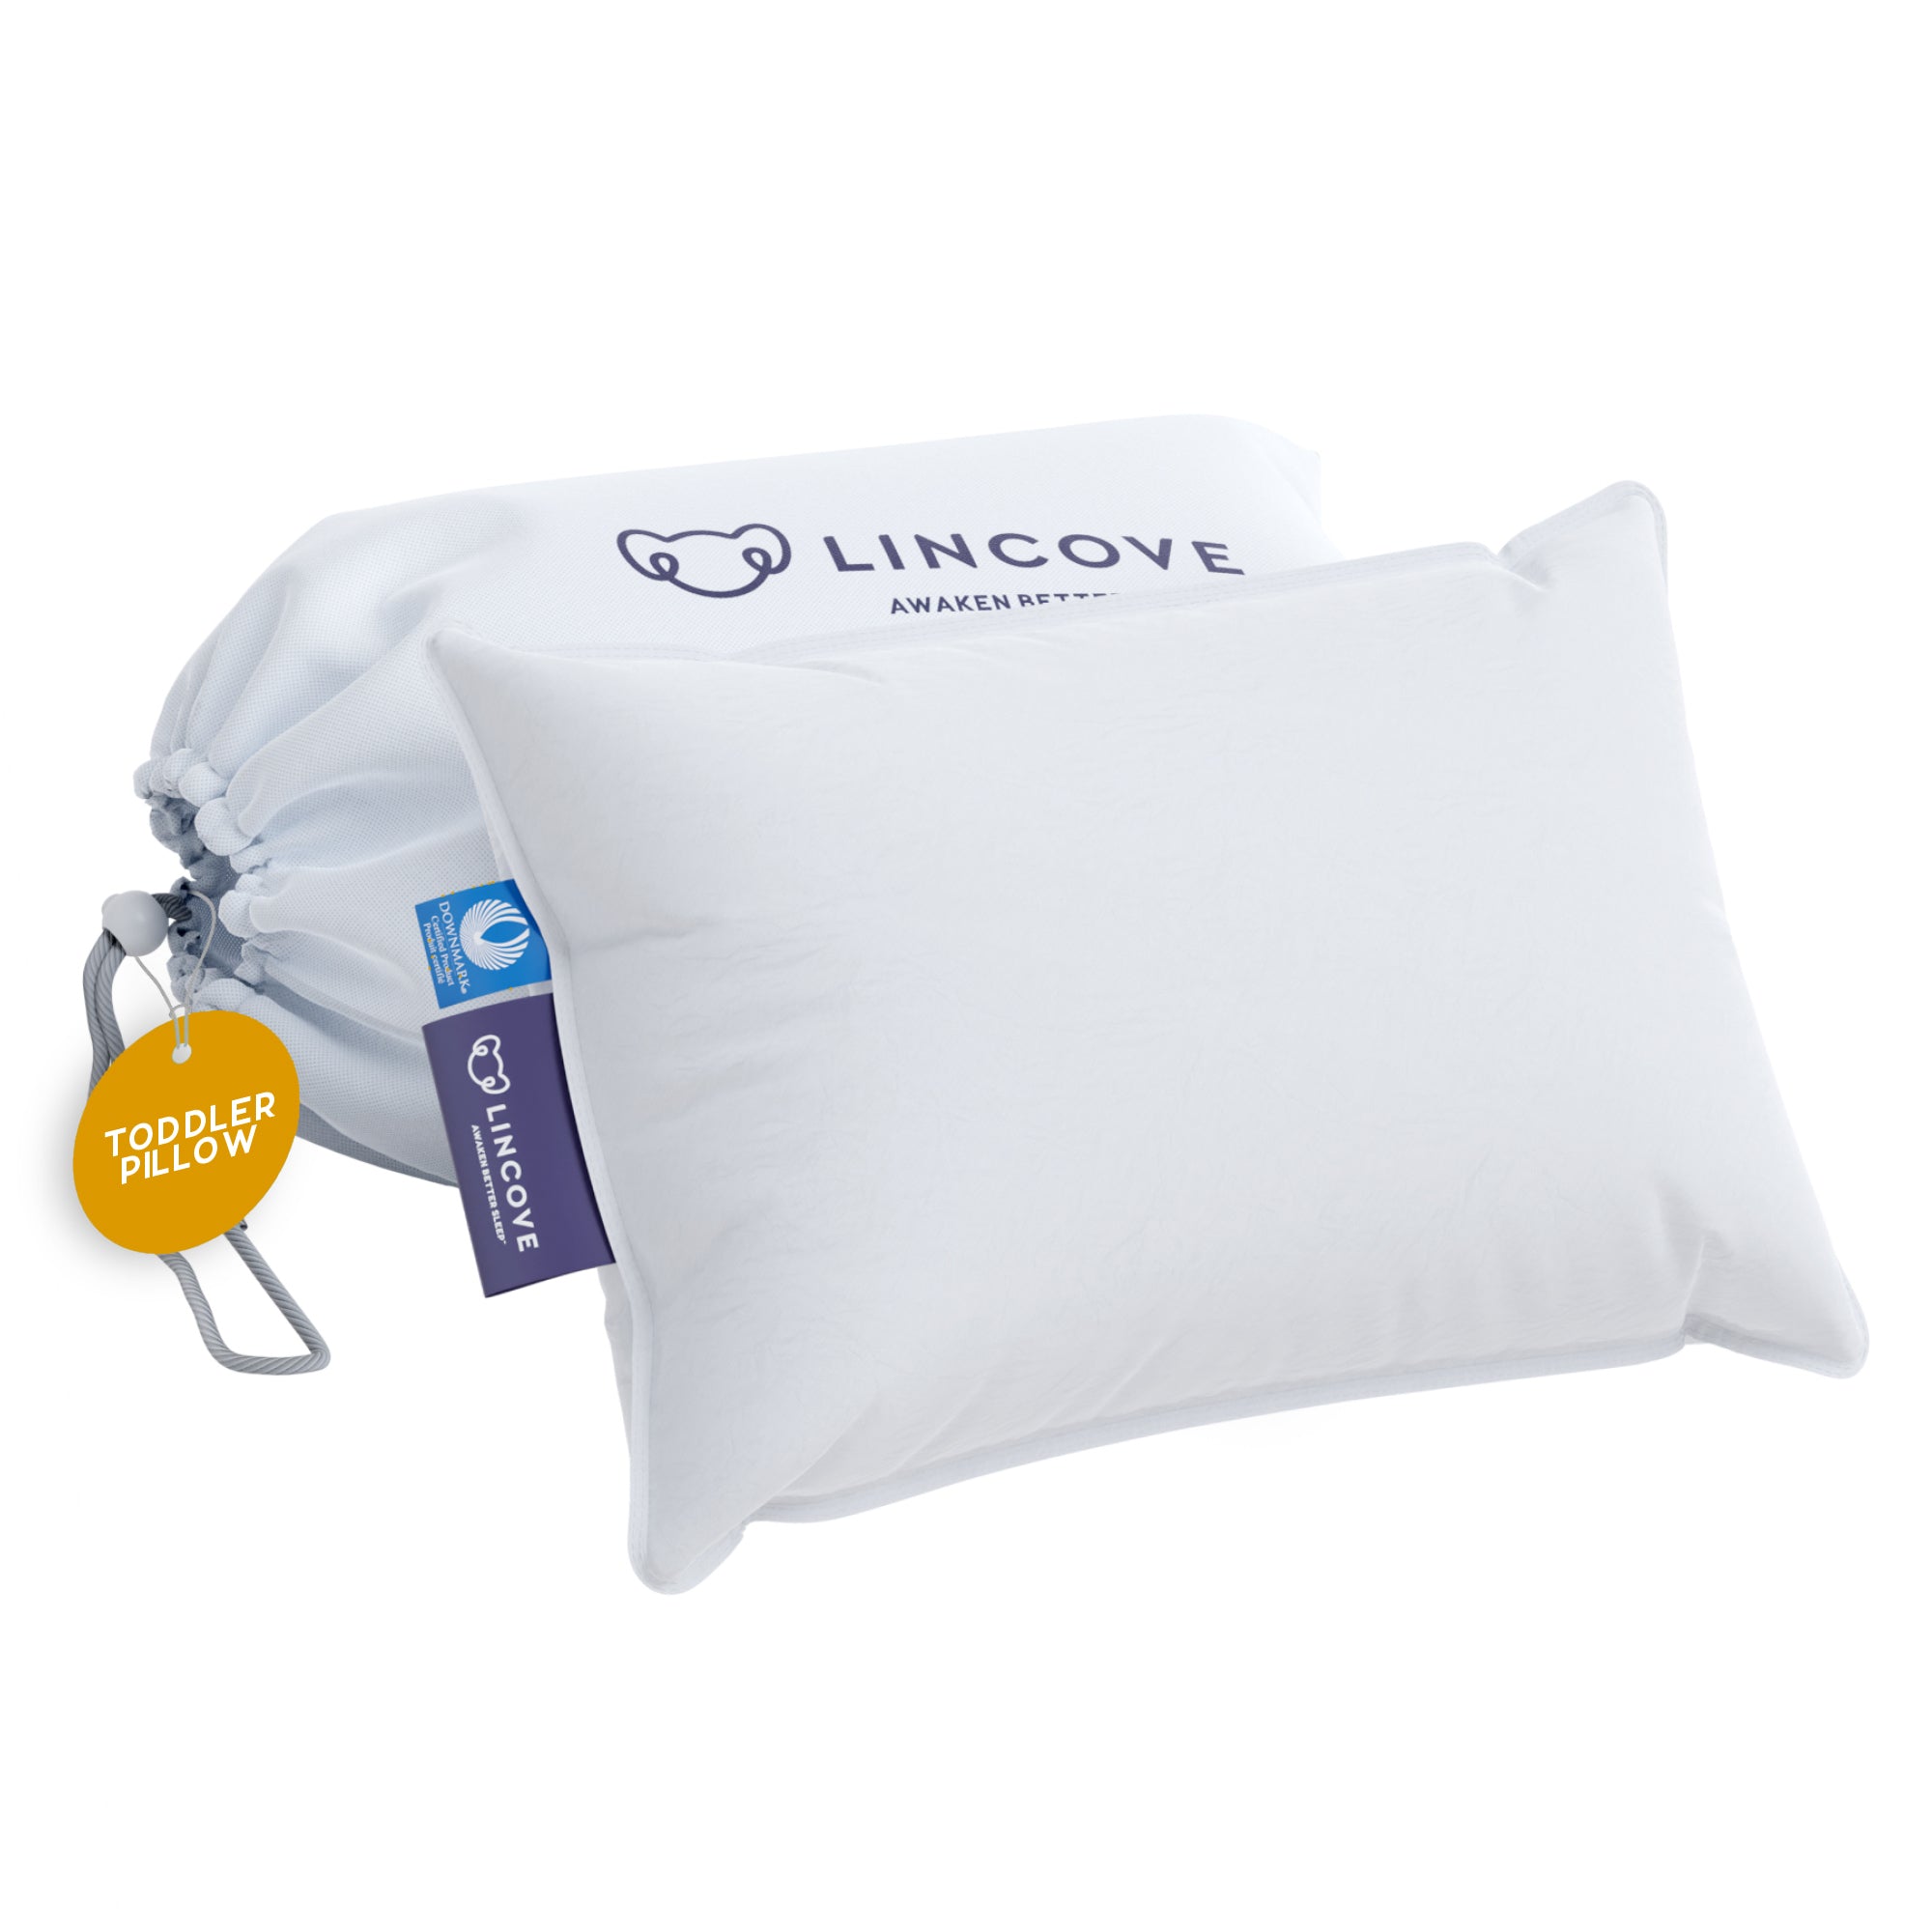 Down and Feather Toddler Pillow